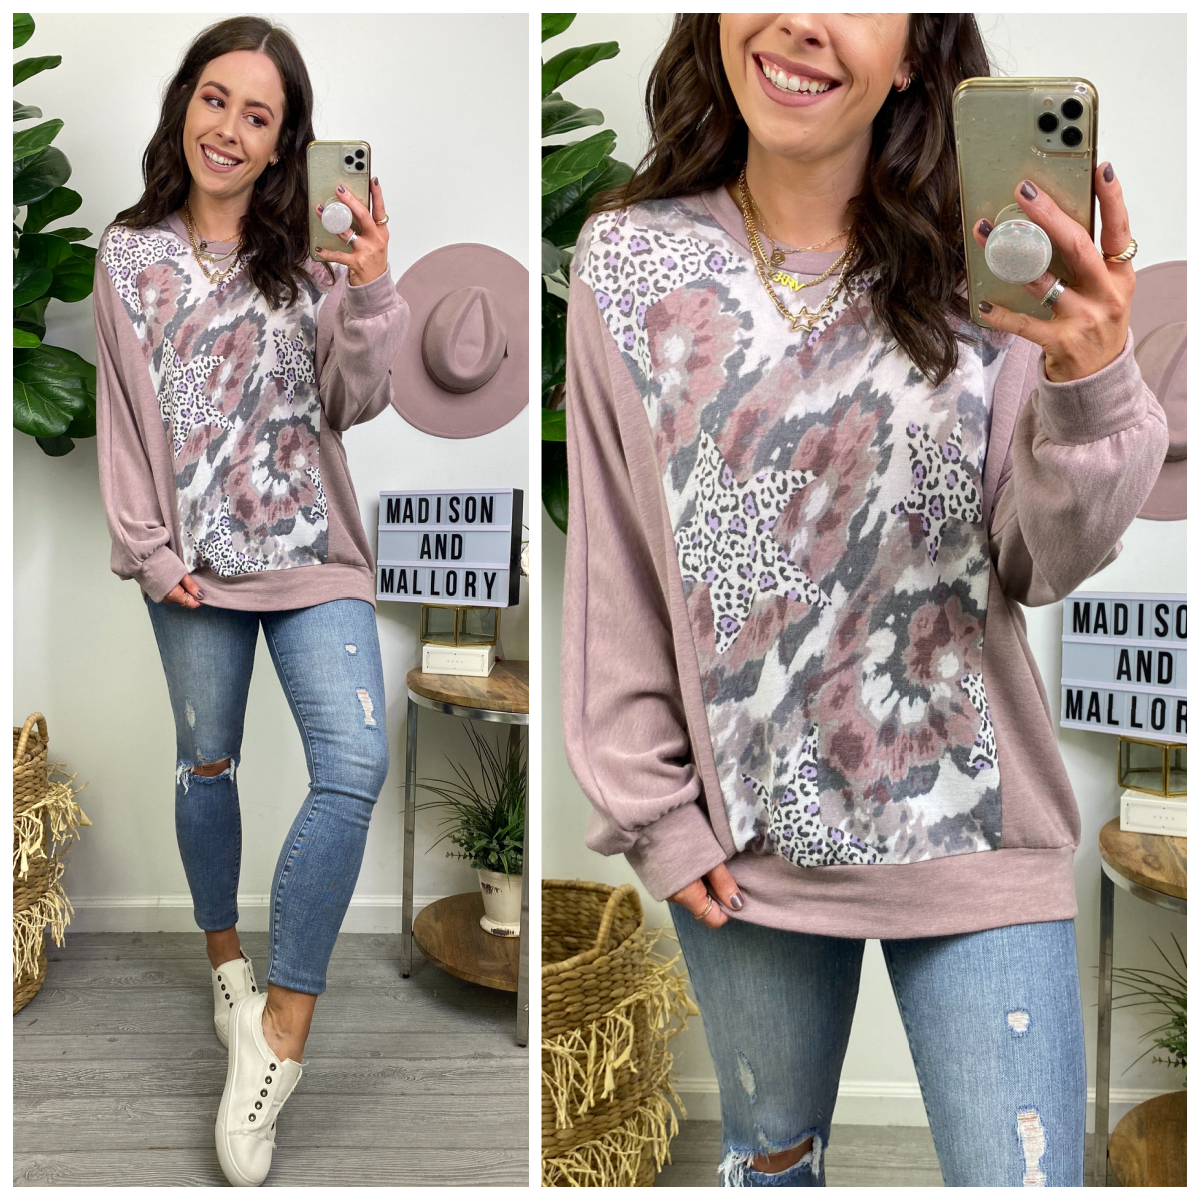  Good Days Only Star Animal Print Contrast Top - Madison and Mallory